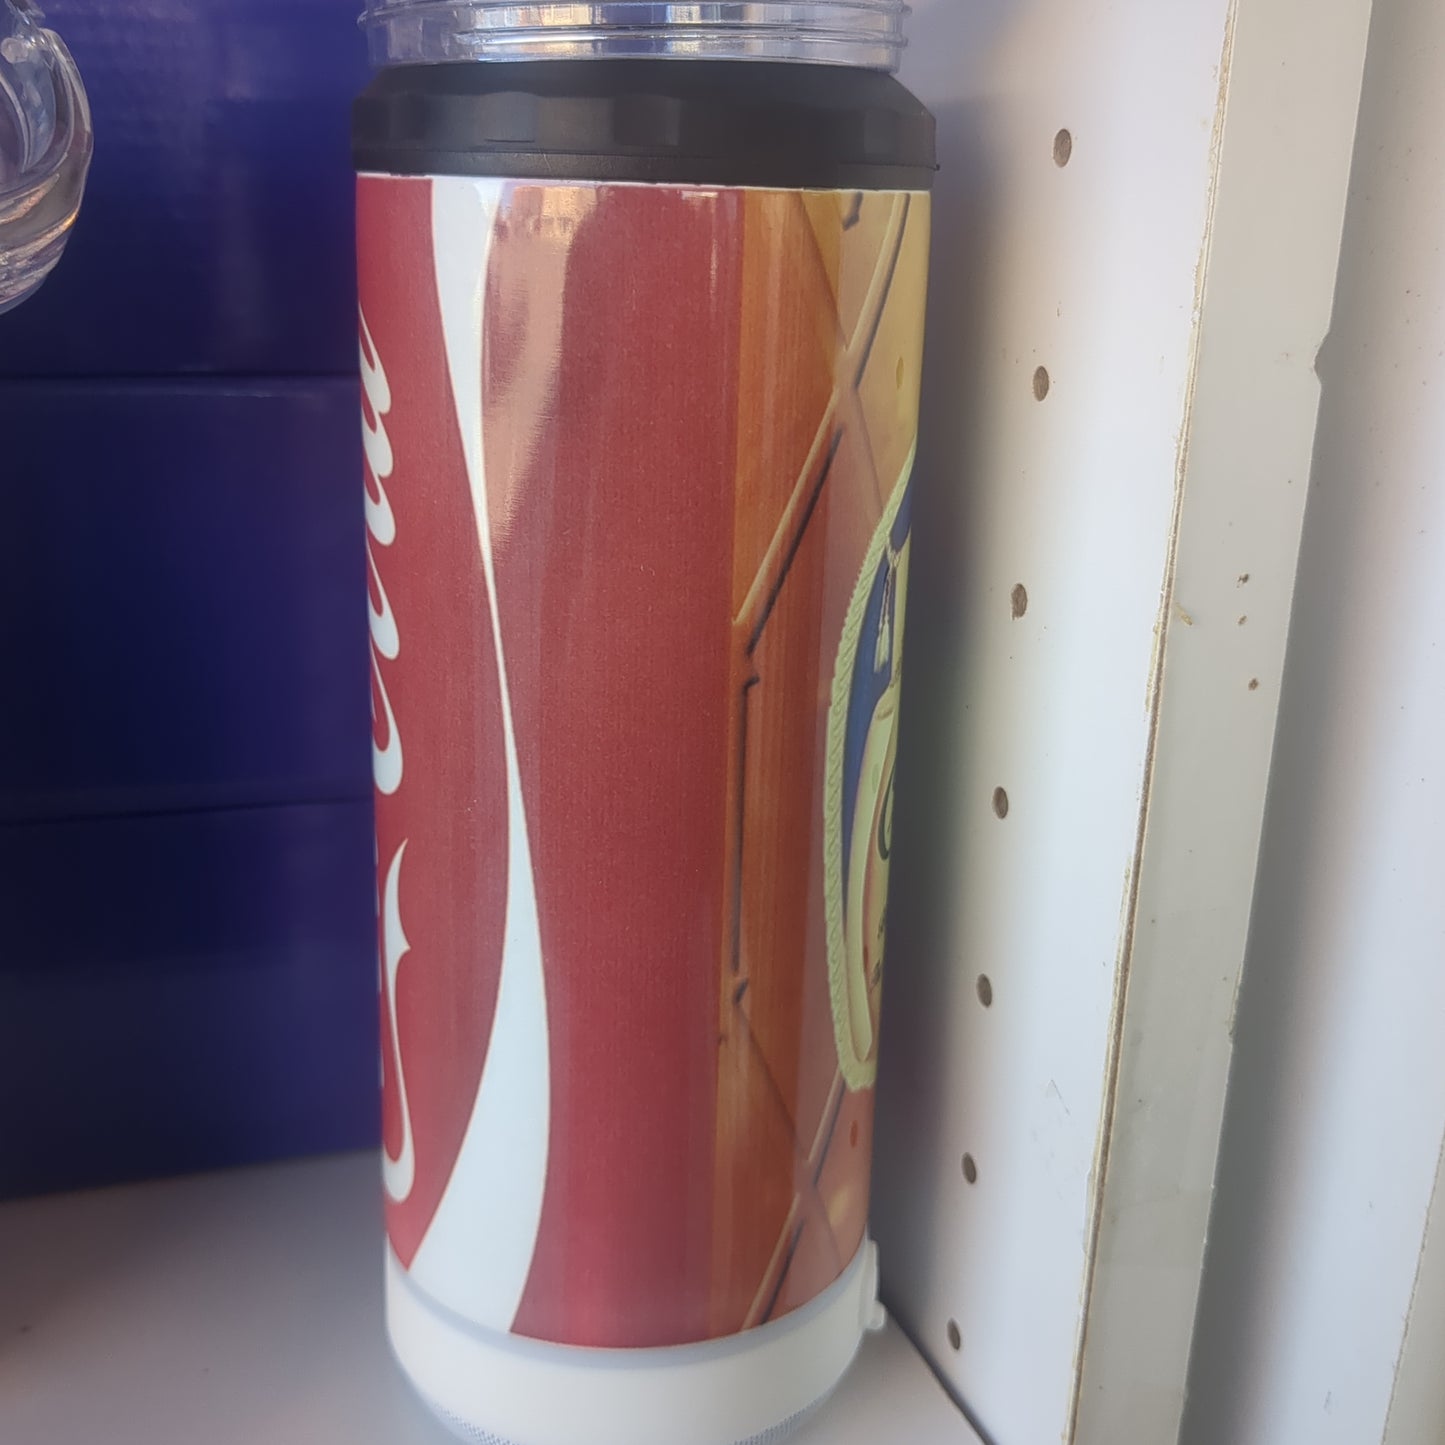 17 Oz Insulated Stainless Steel Tumbler With Bluetooth Speaker Tumblr Lid And Can Cooler. Cola And Spirits